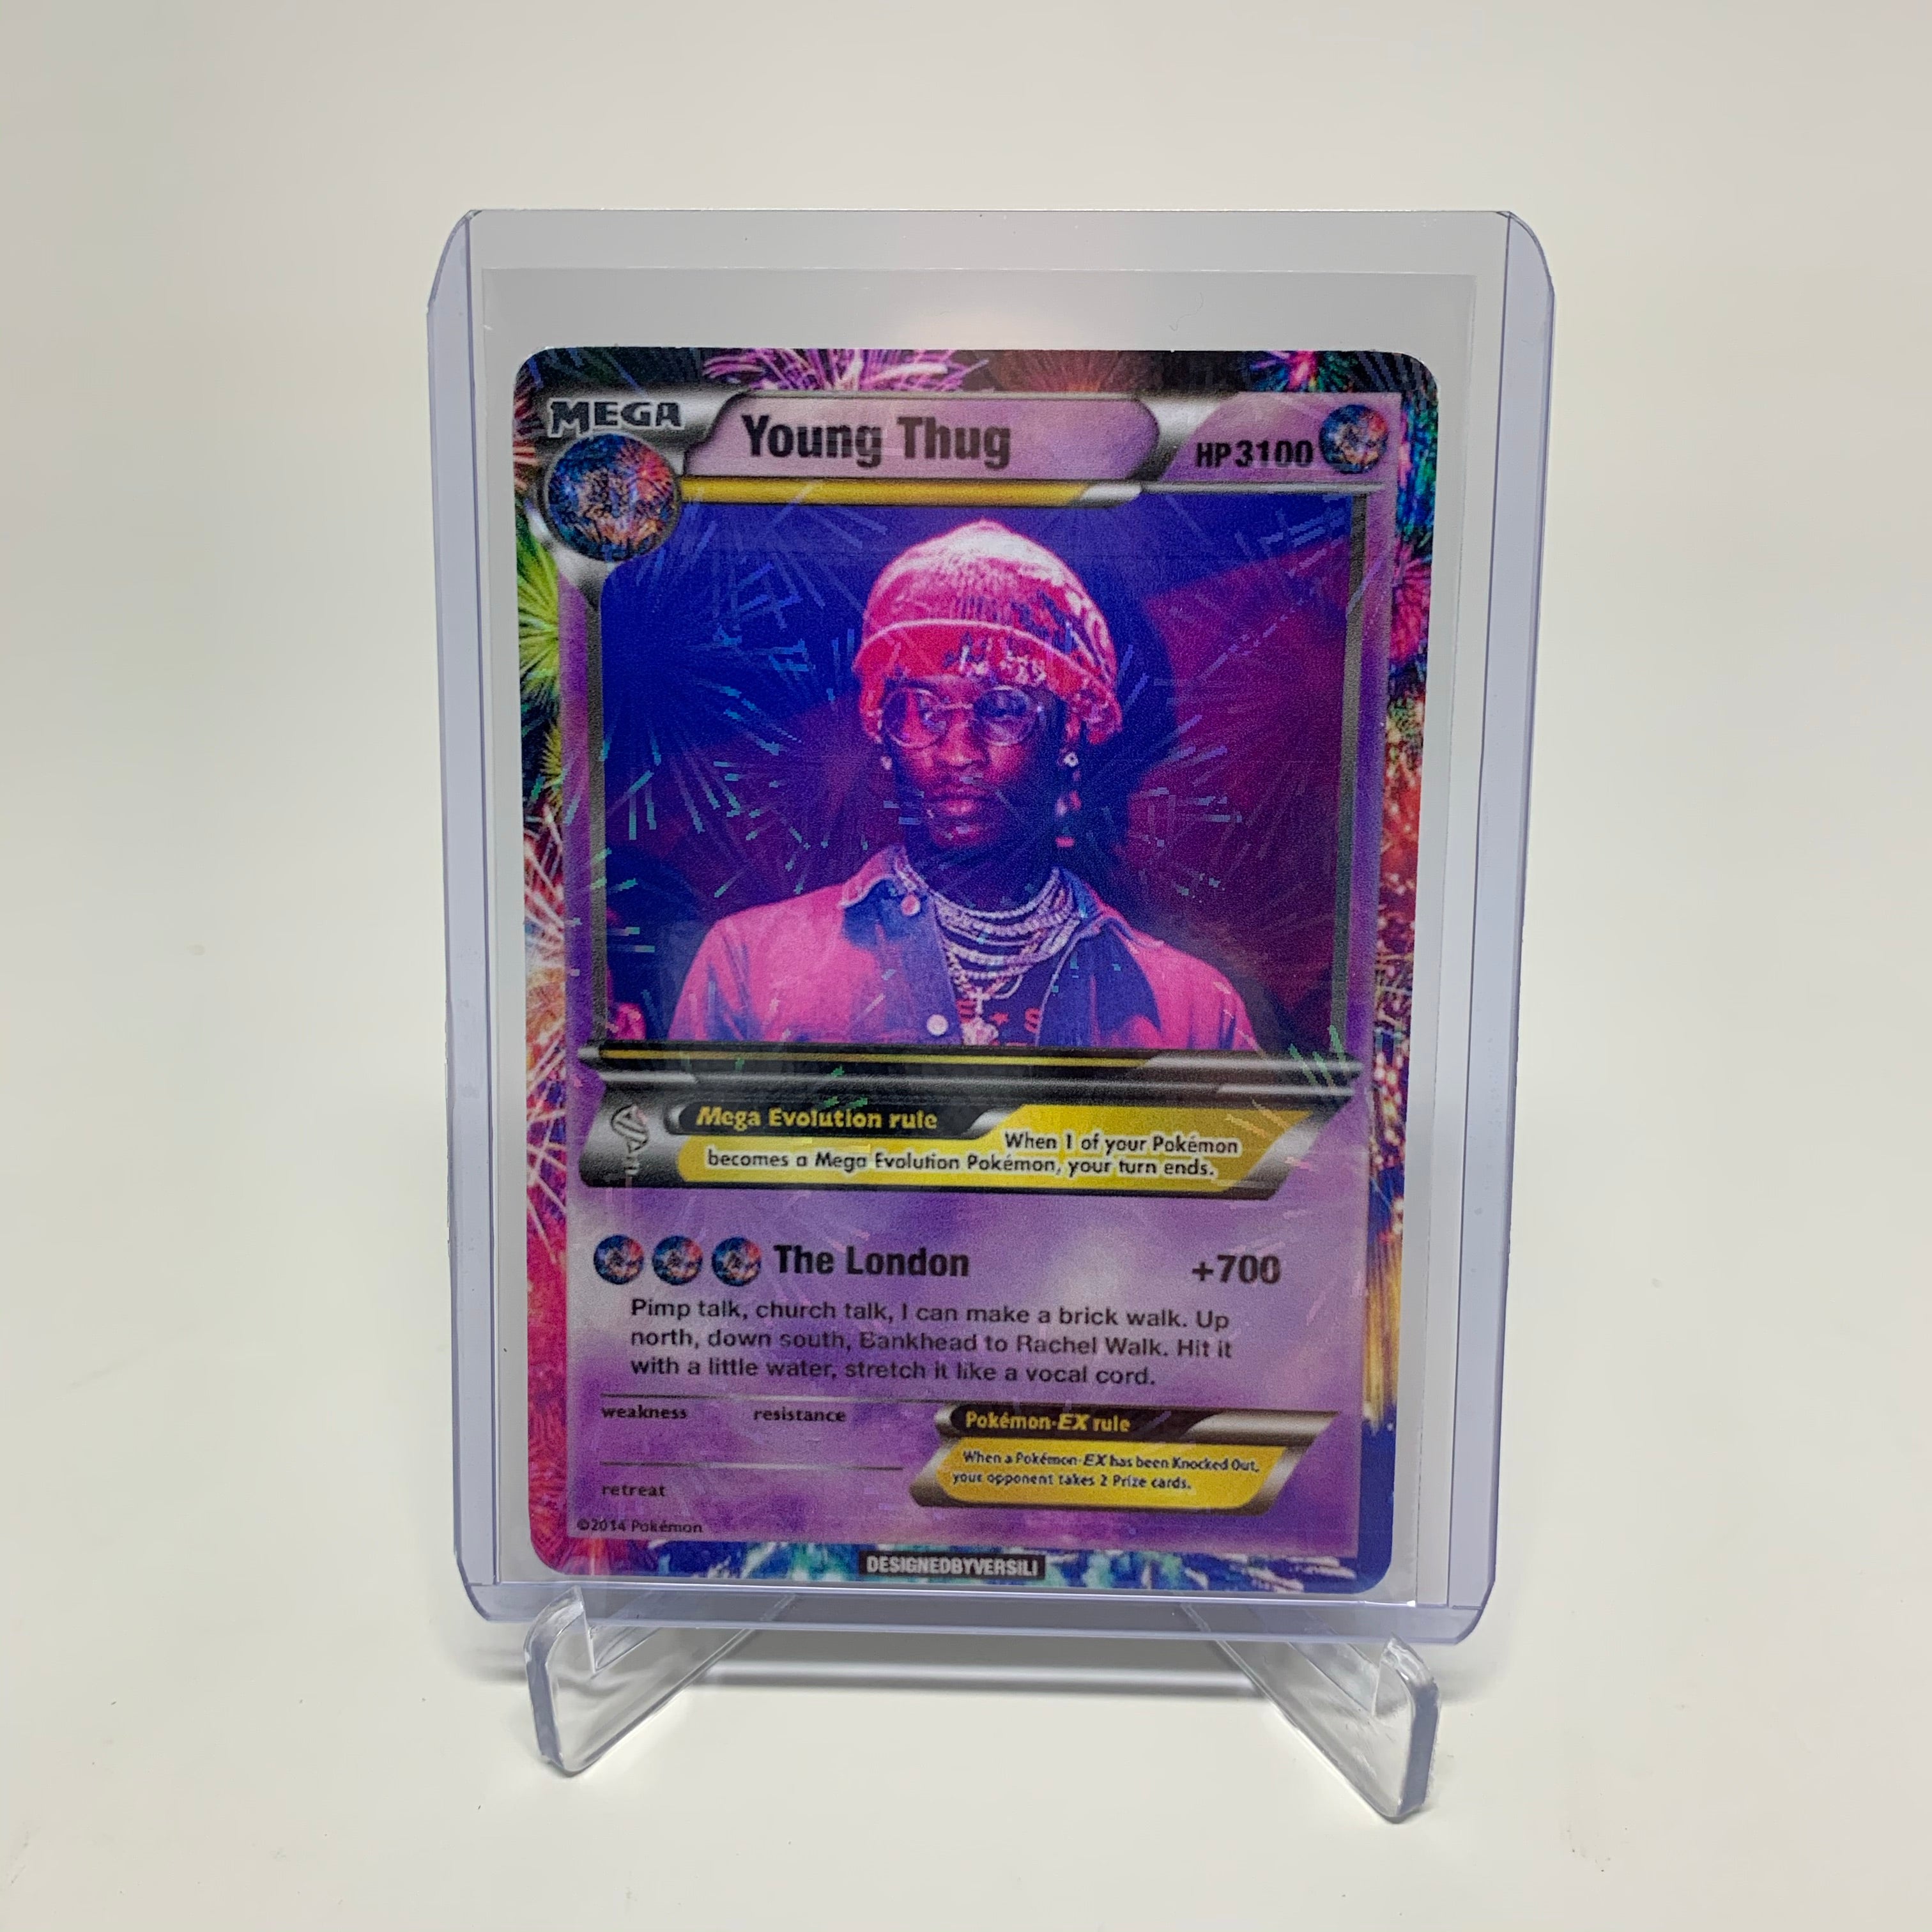 Young Thug Pokémon Card (4th of July)